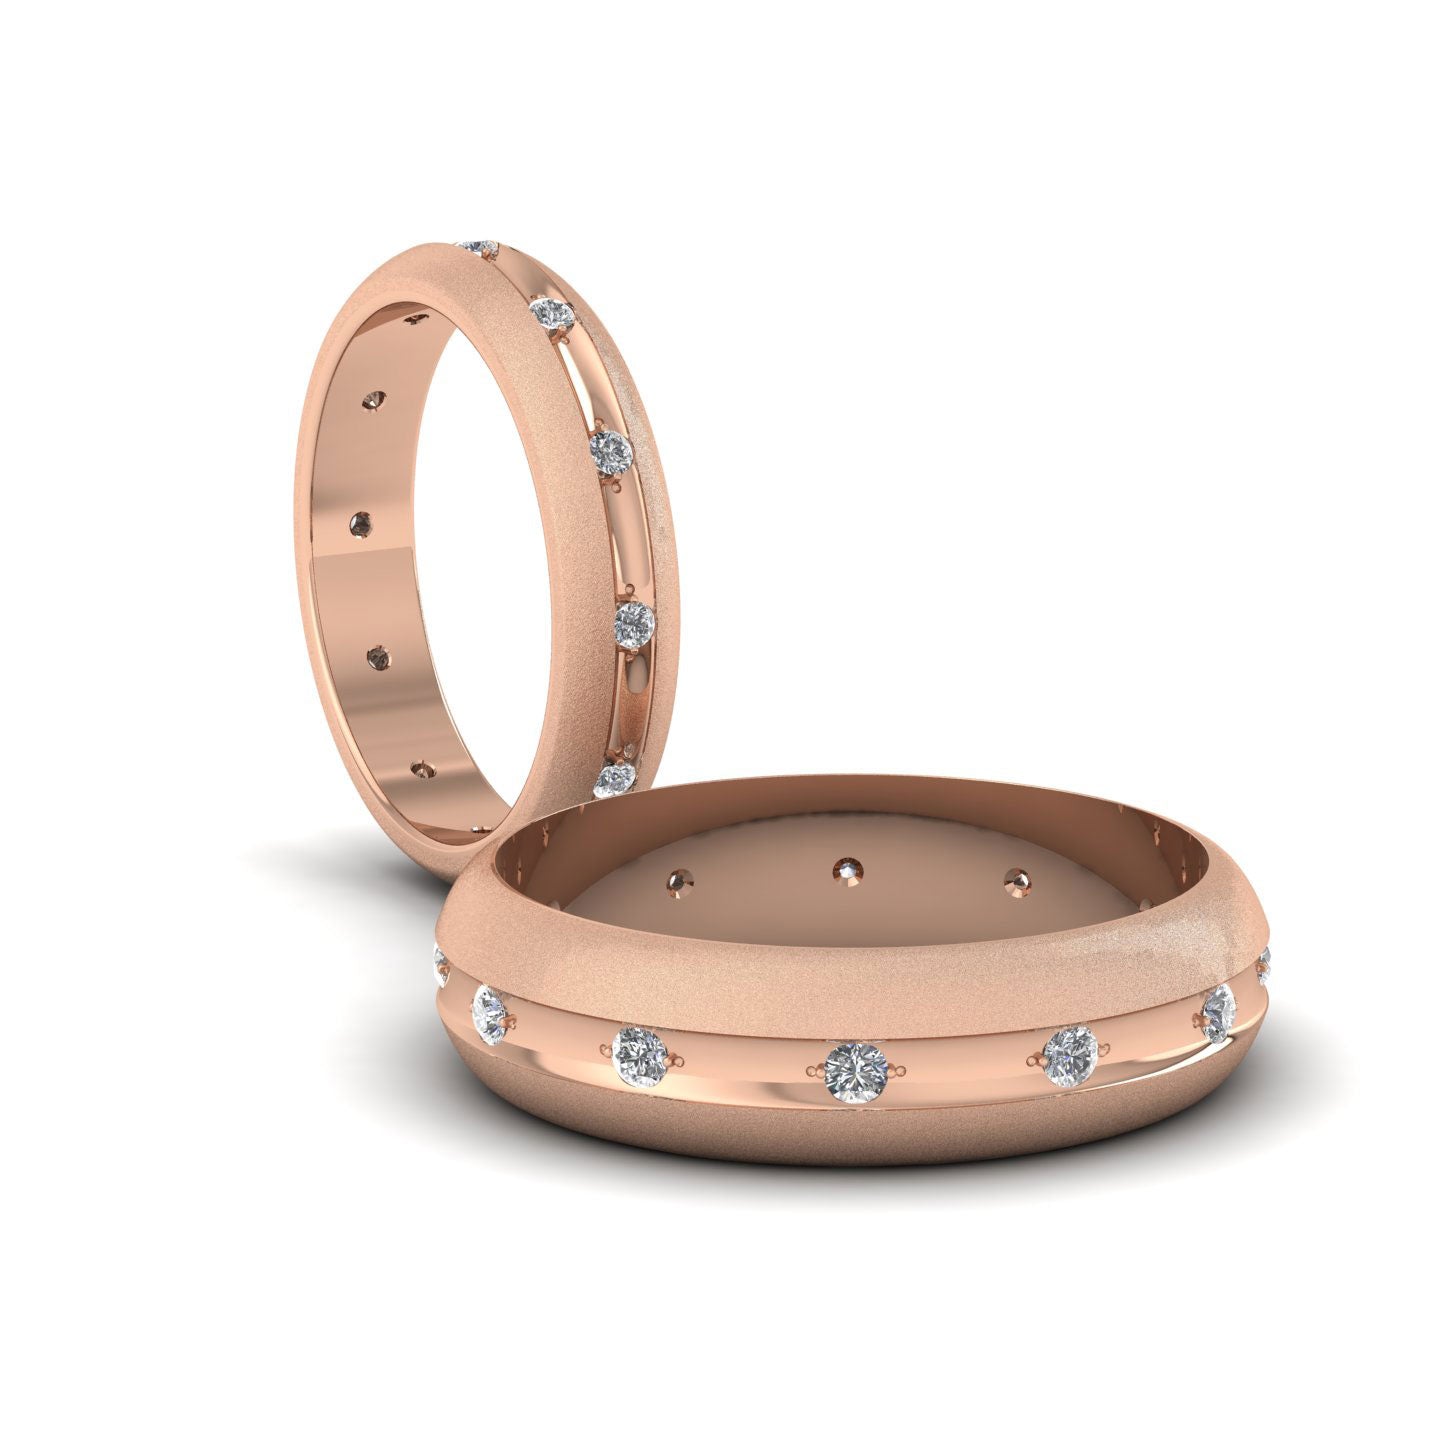 Wedding Ring With Concave Groove Set With Twelve Diamonds 4mm Wide In 9ct Rose Gold